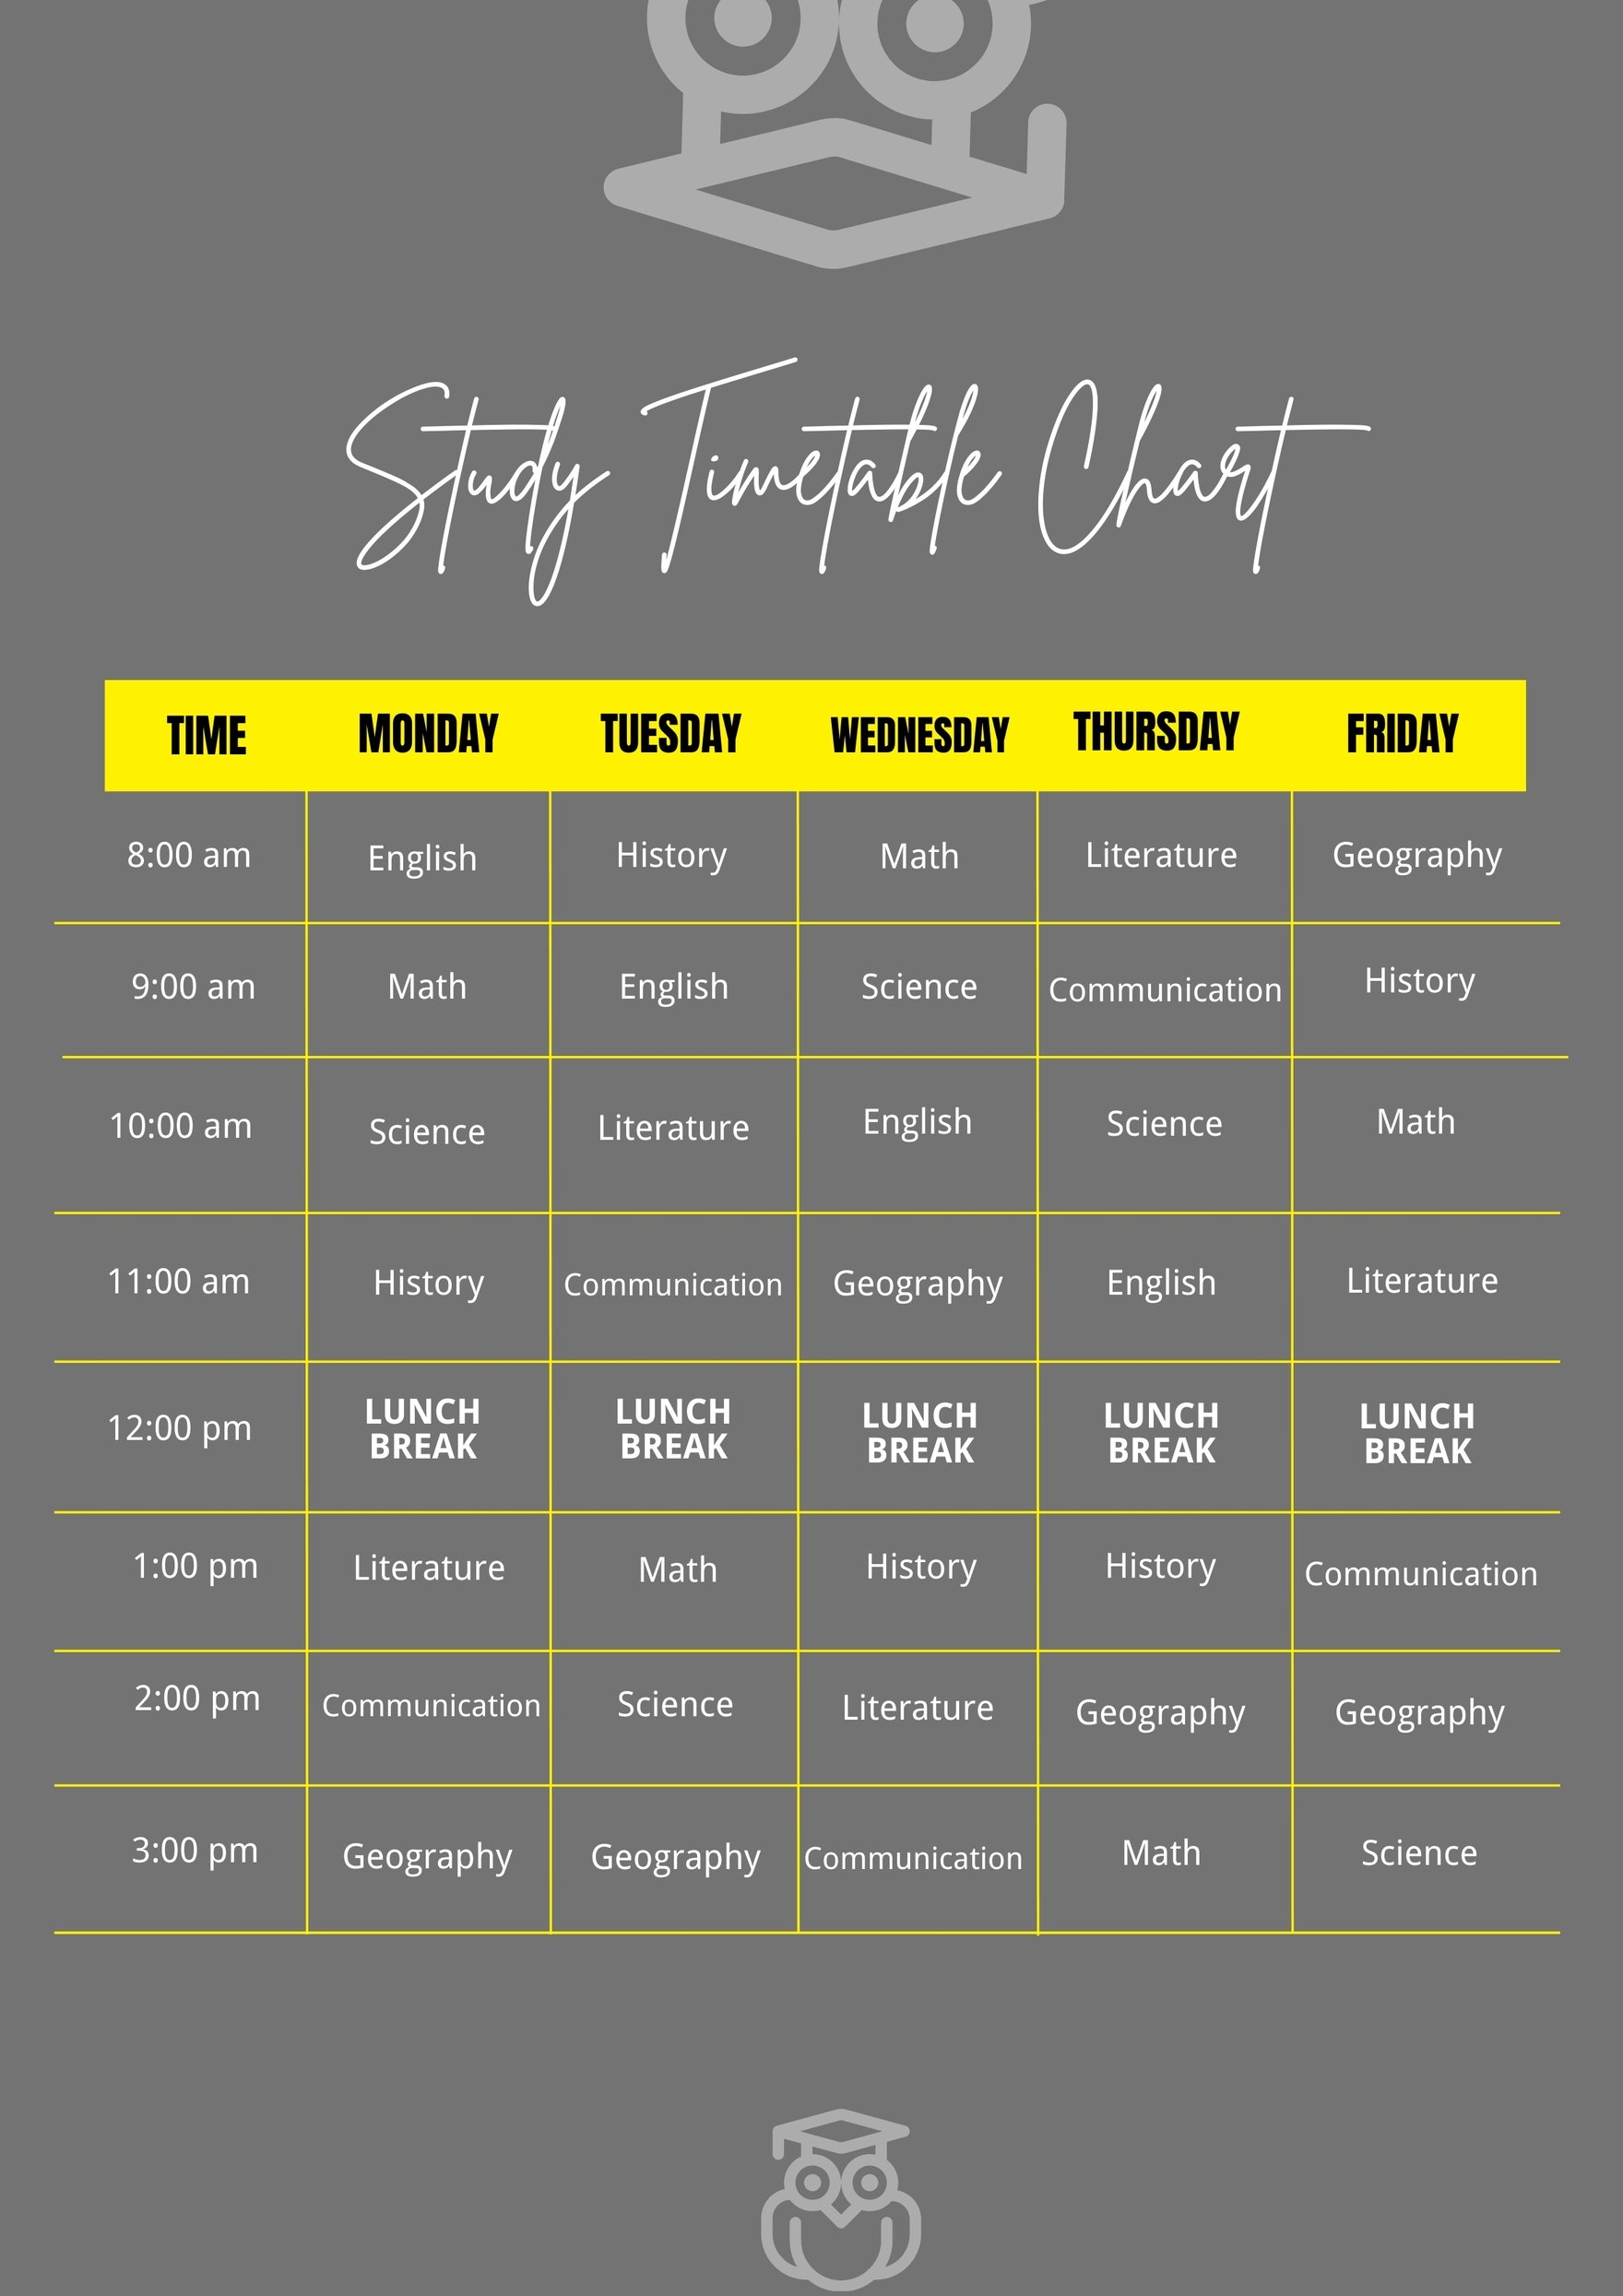 Personalized Timetable Chart Template